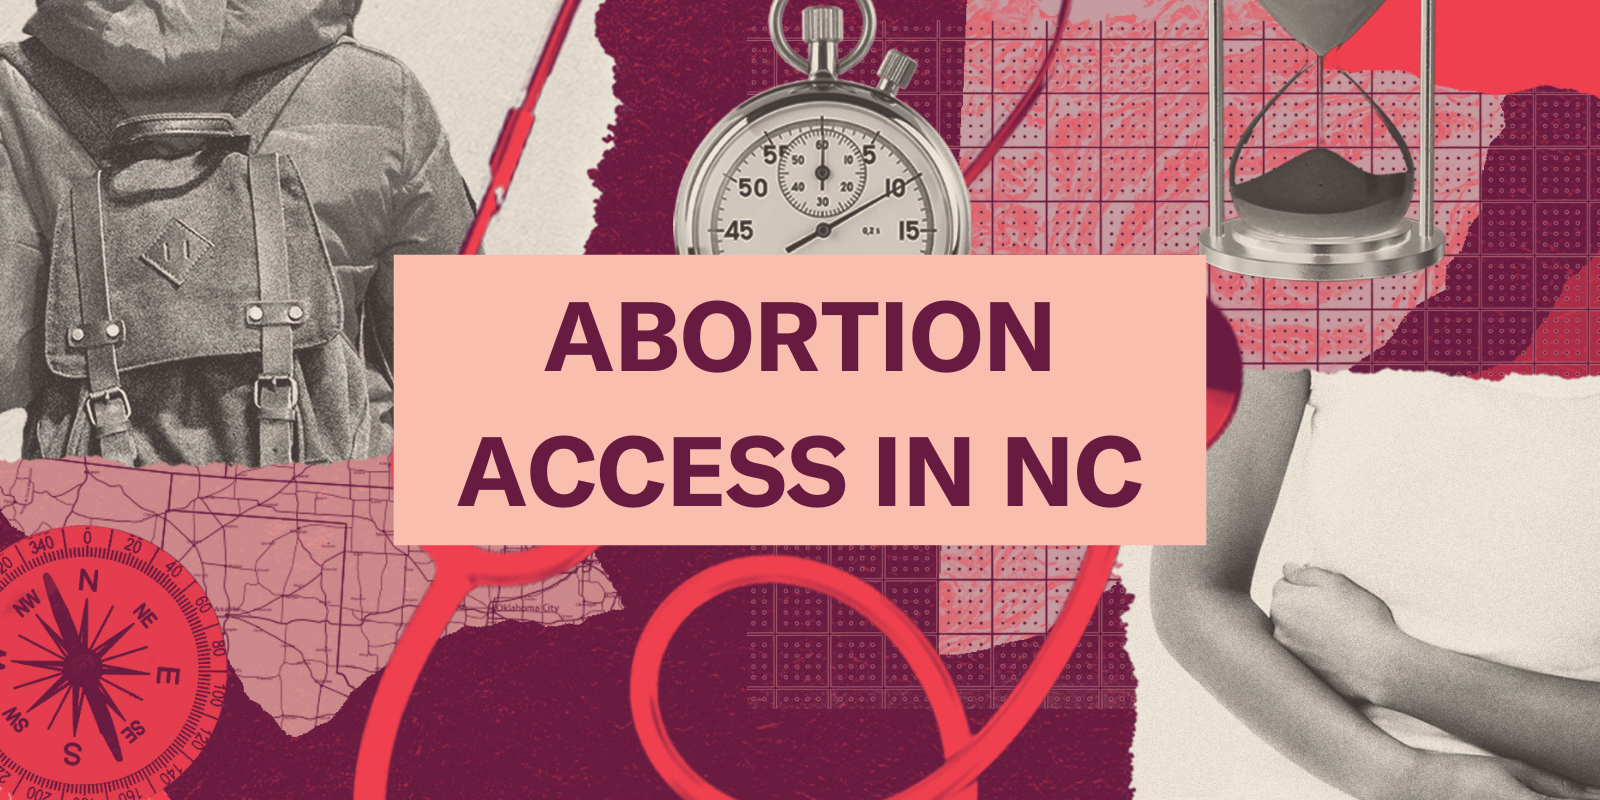 Abortion Access in NC